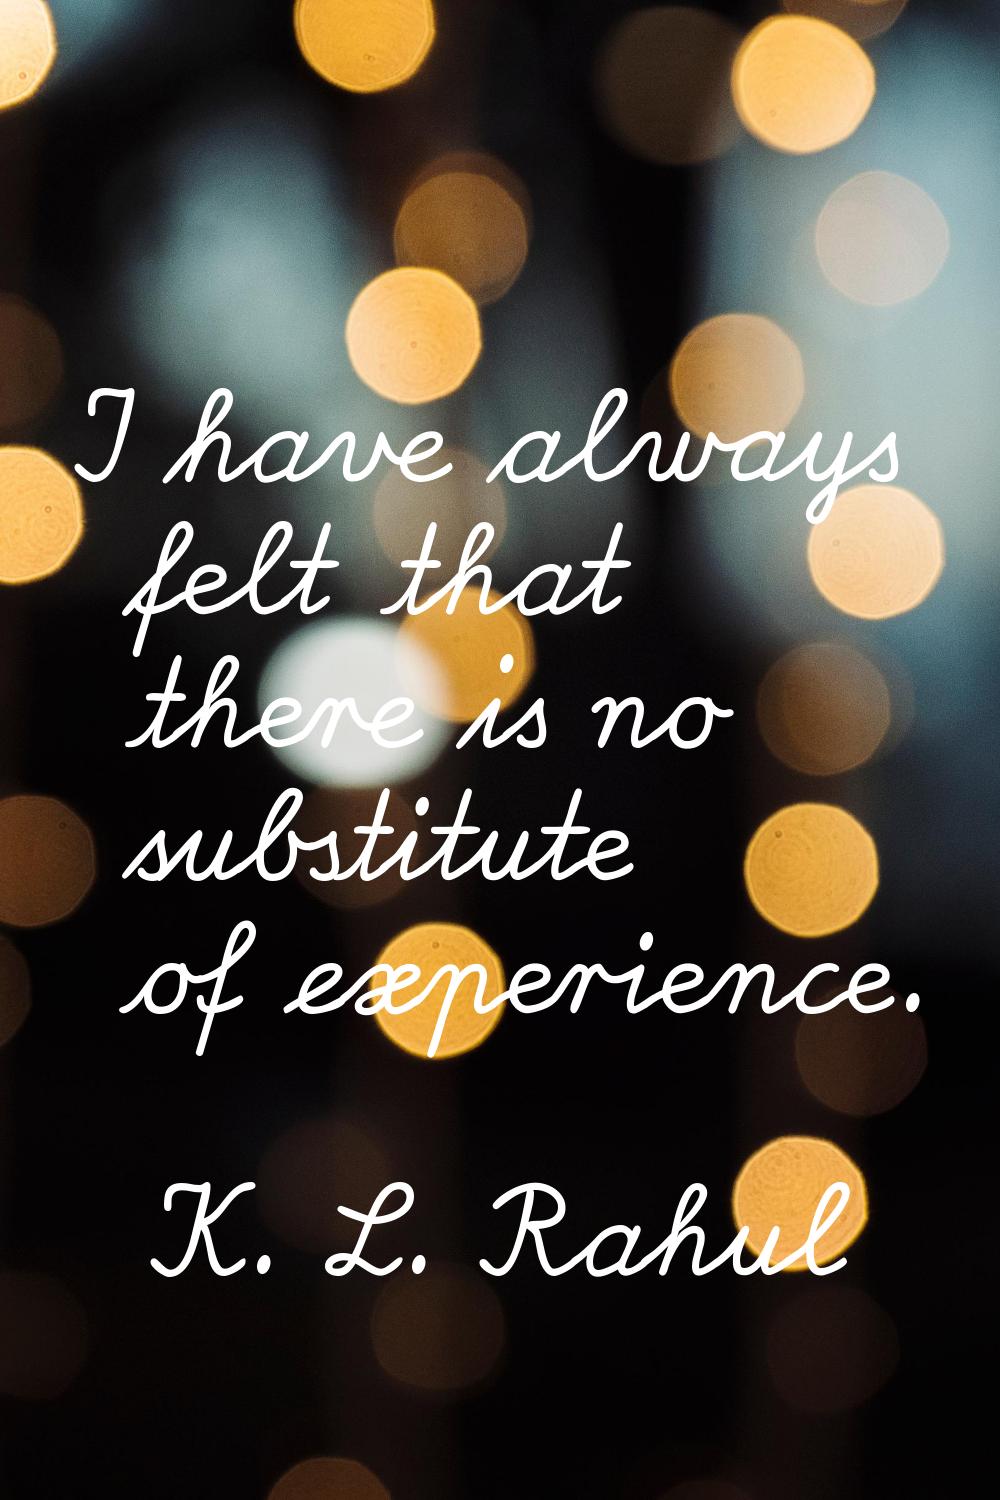 I have always felt that there is no substitute of experience.